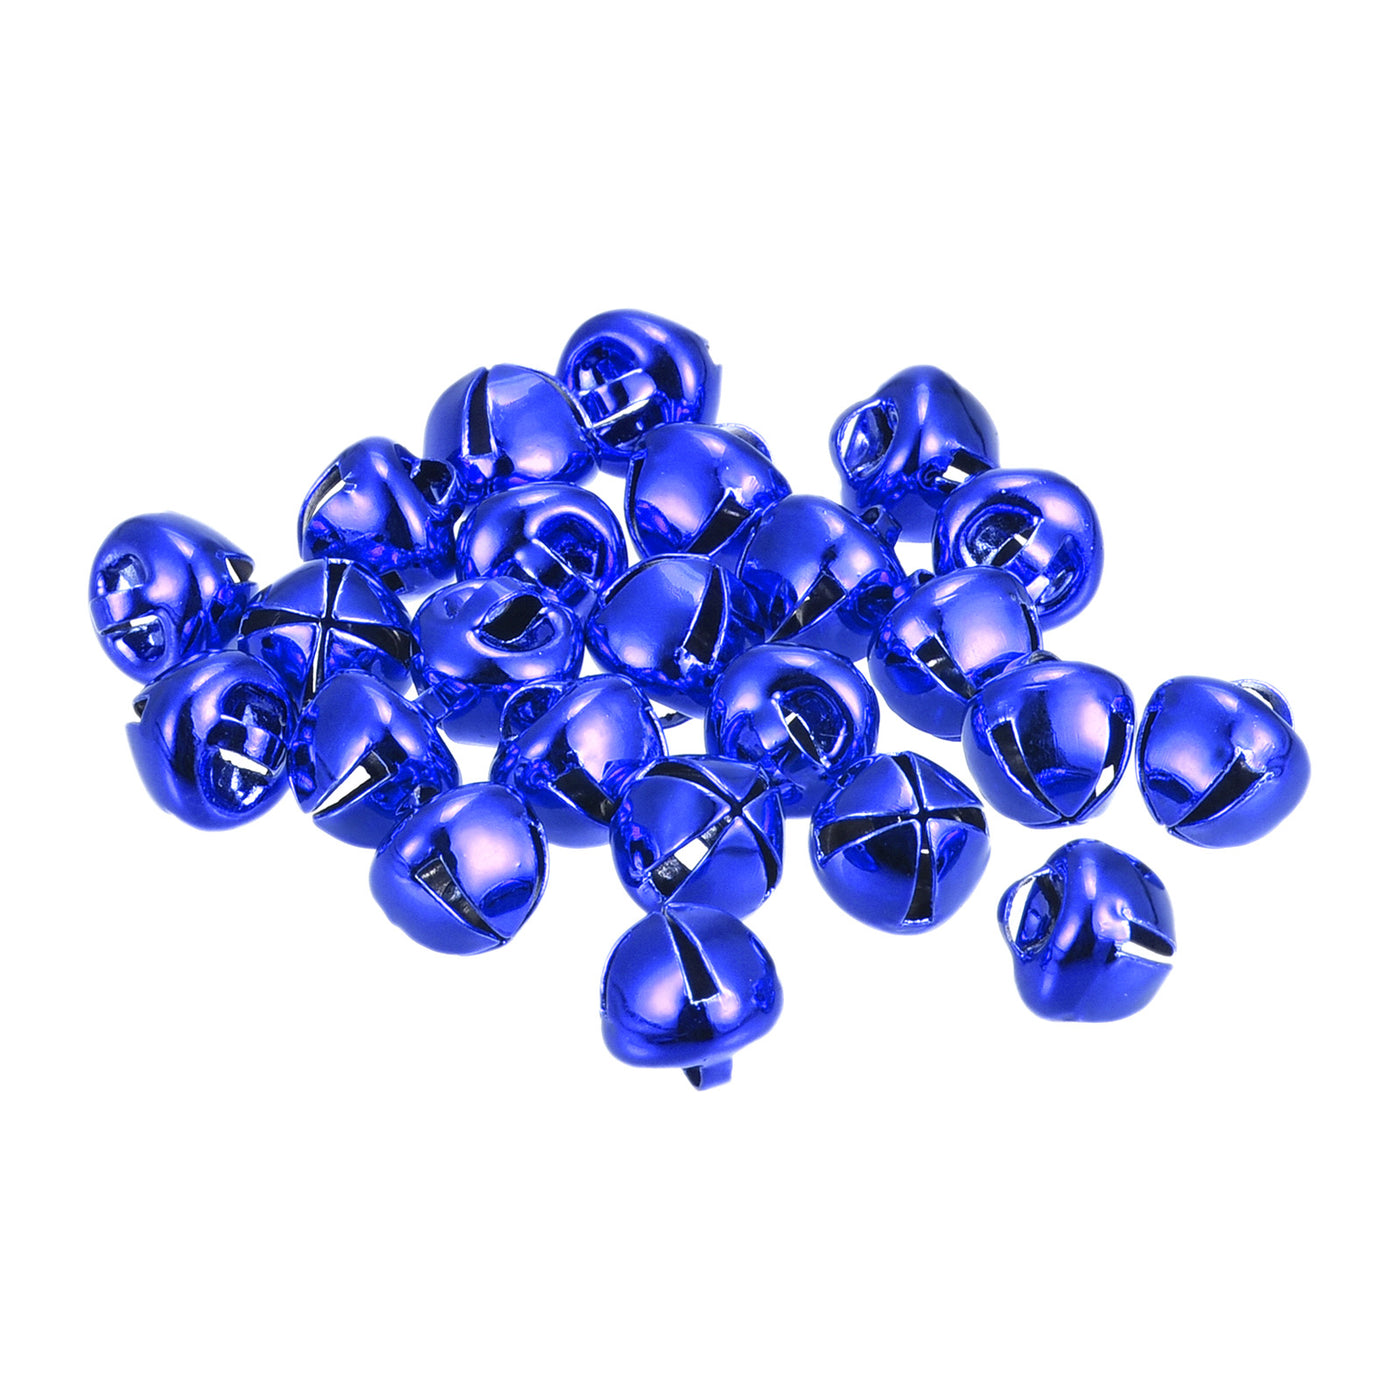 Uxcell Uxcell Jingle Bells, 8mm 48pcs Carbon Steel Craft Bells for DIY Christmas, Blue